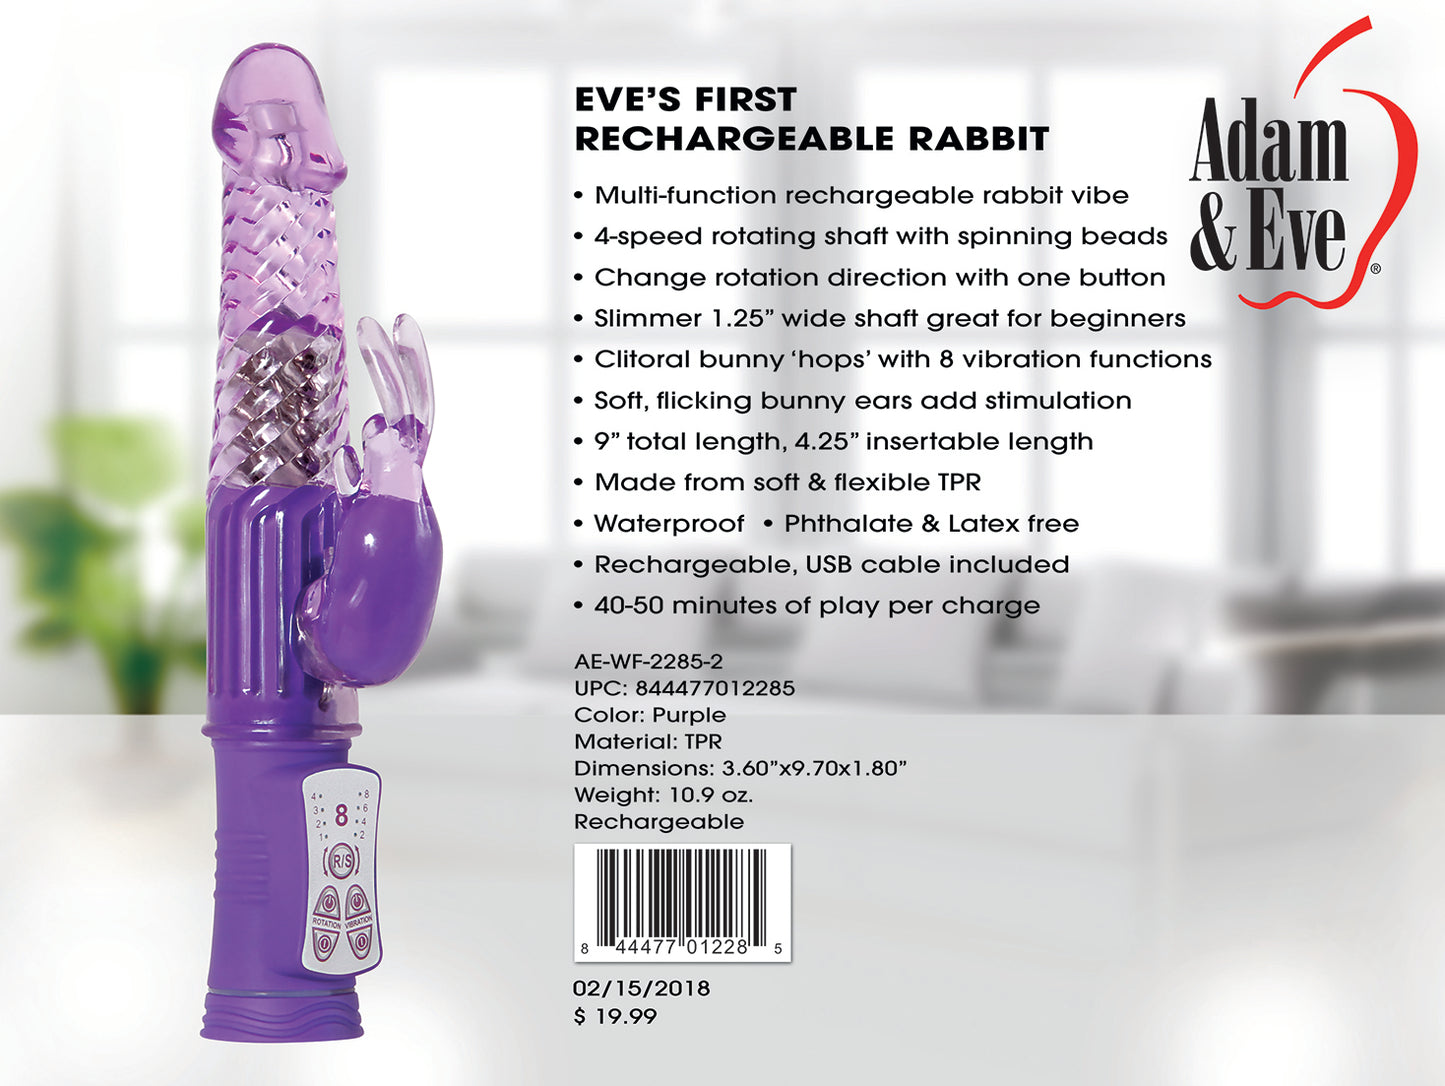 Eve's First Rechargeable Rabbit